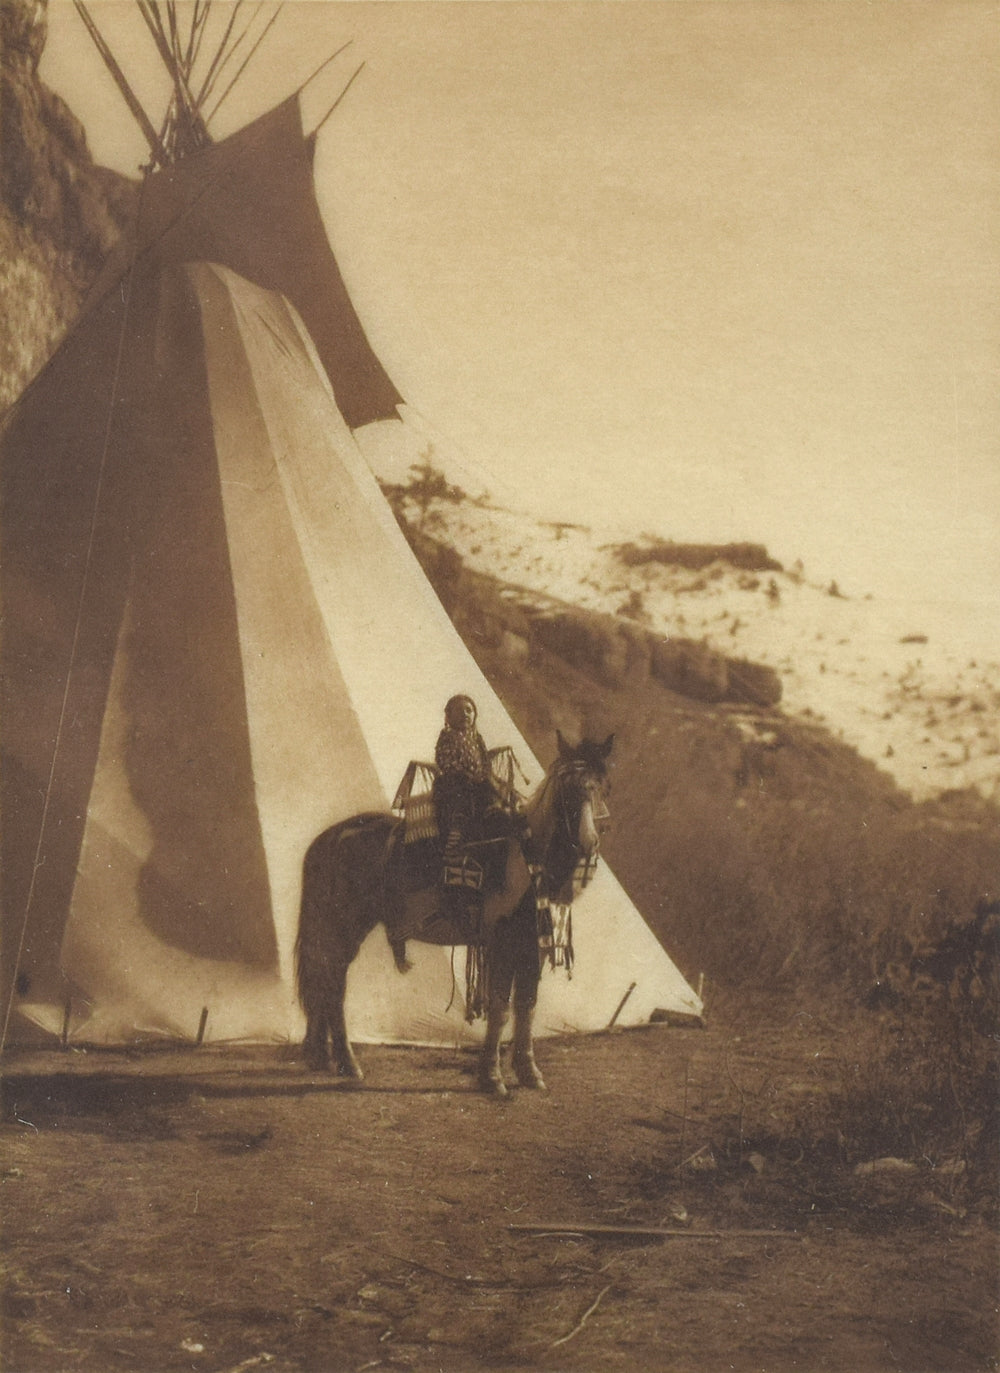 Edward S. Curtis (1868-1952) - A Young Horsewoman